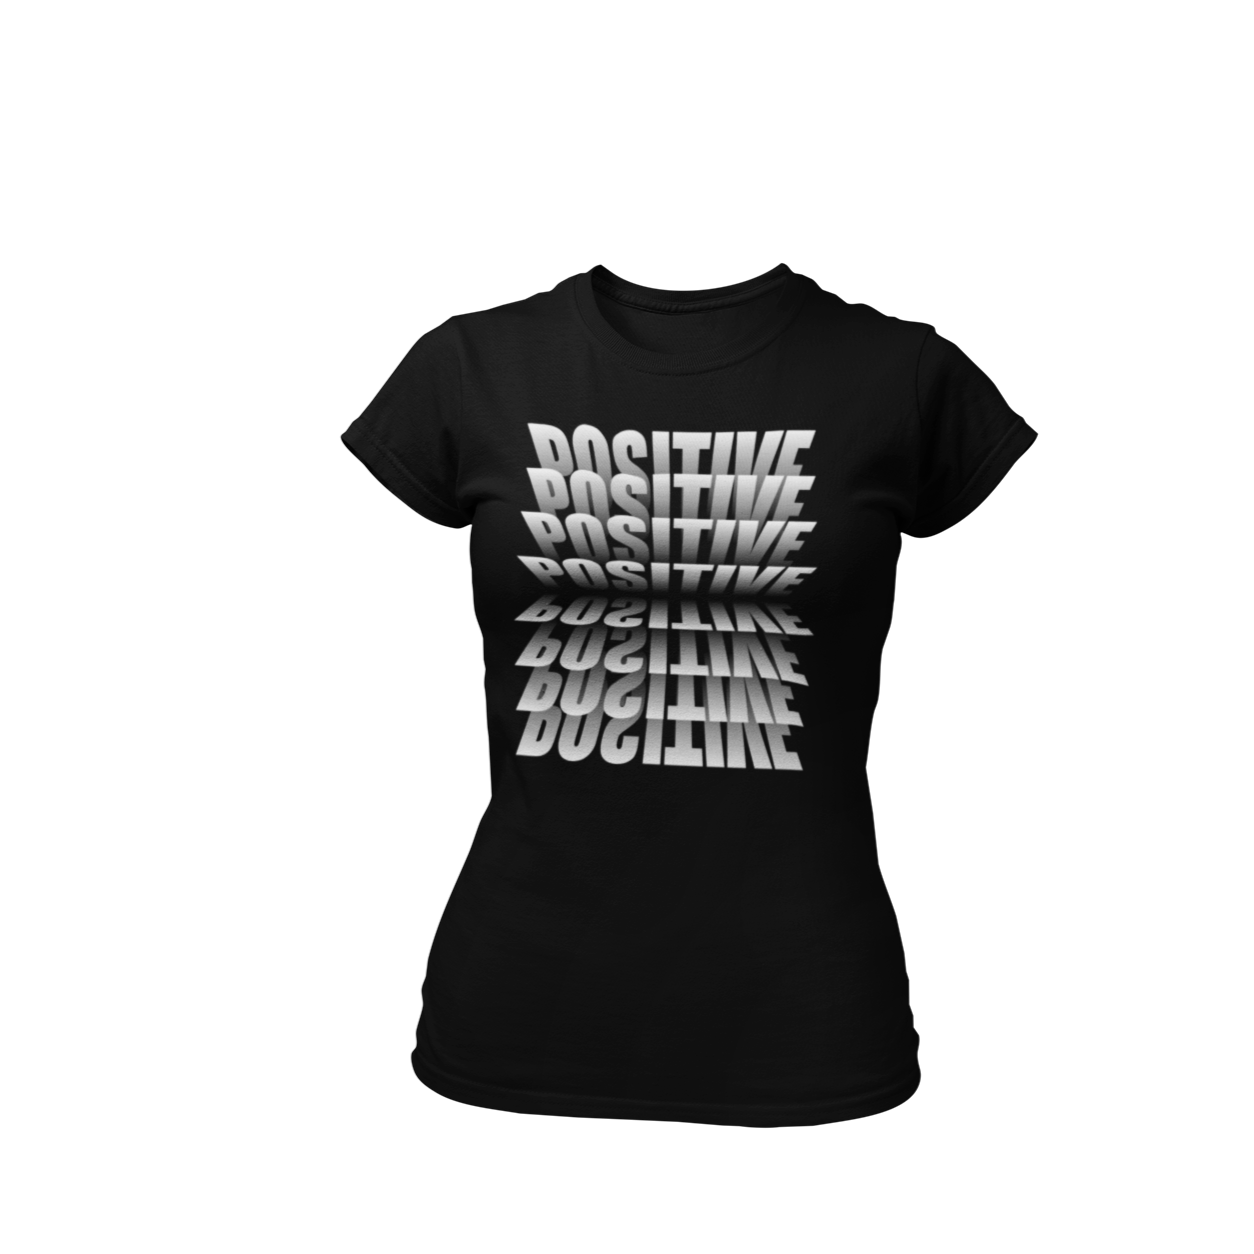 Black positive t-shirt by Made Inc